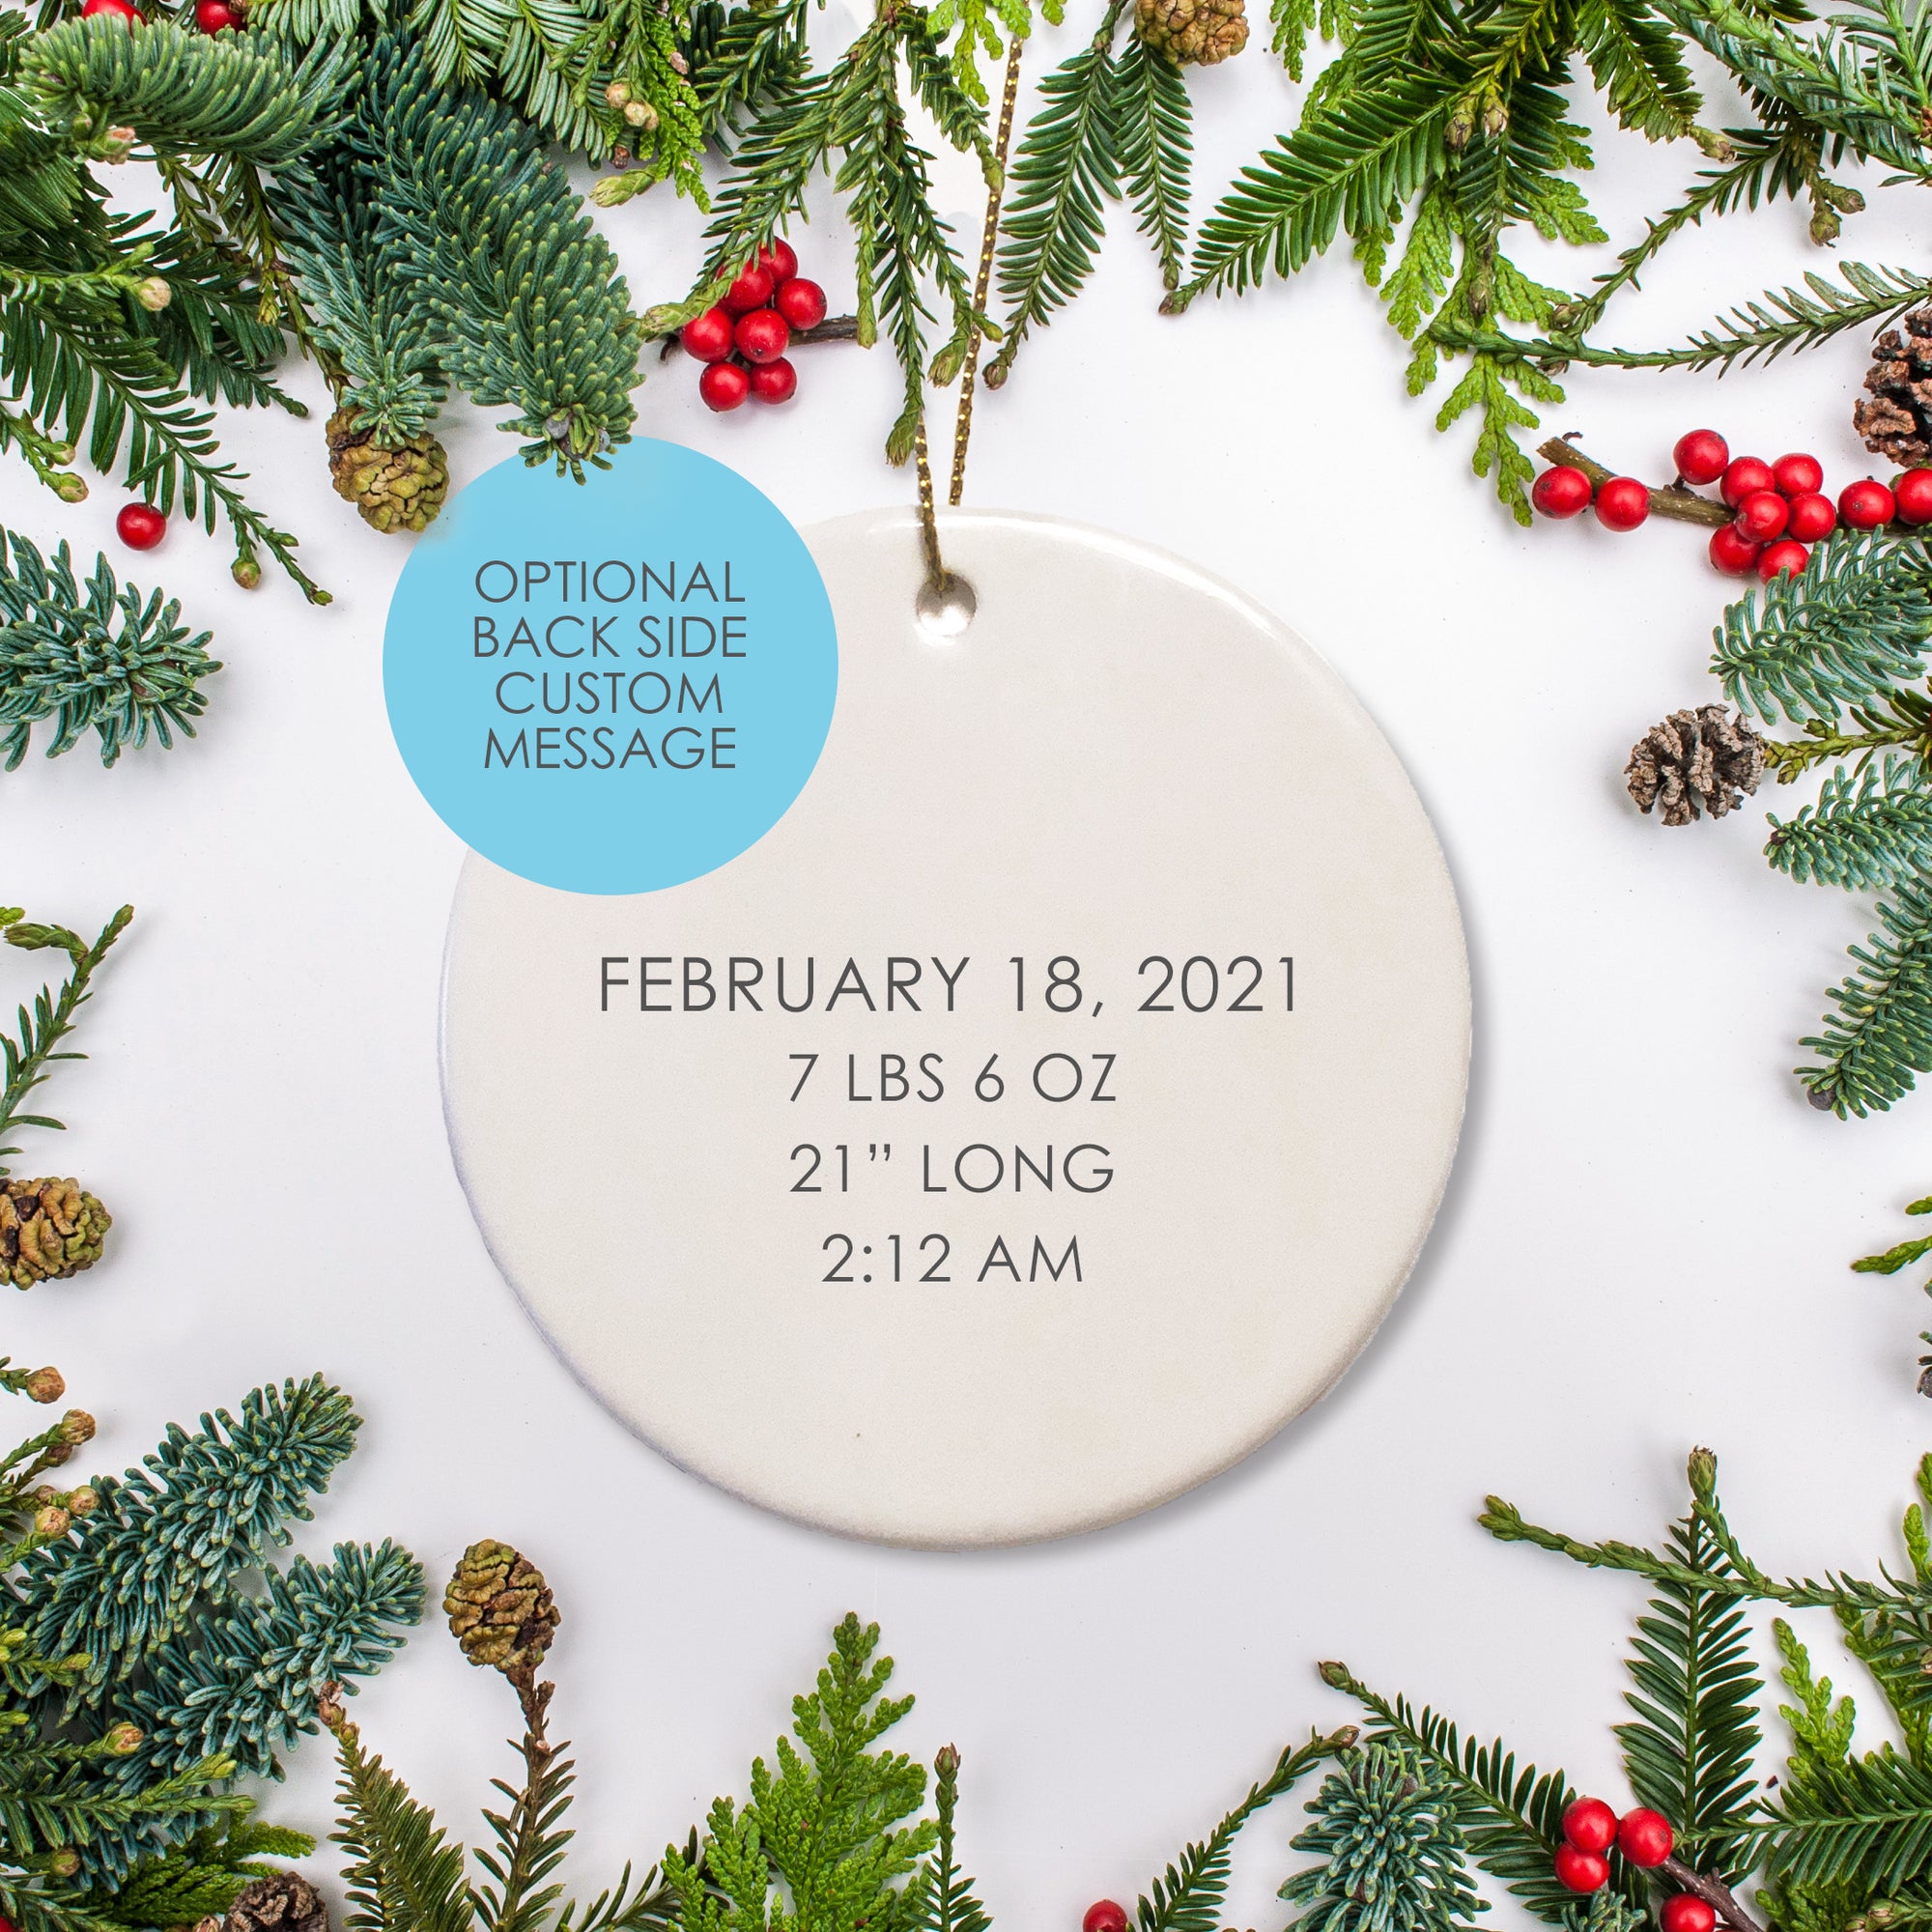 custom text can be added to our ceramic round ornaments, Pipsy.com